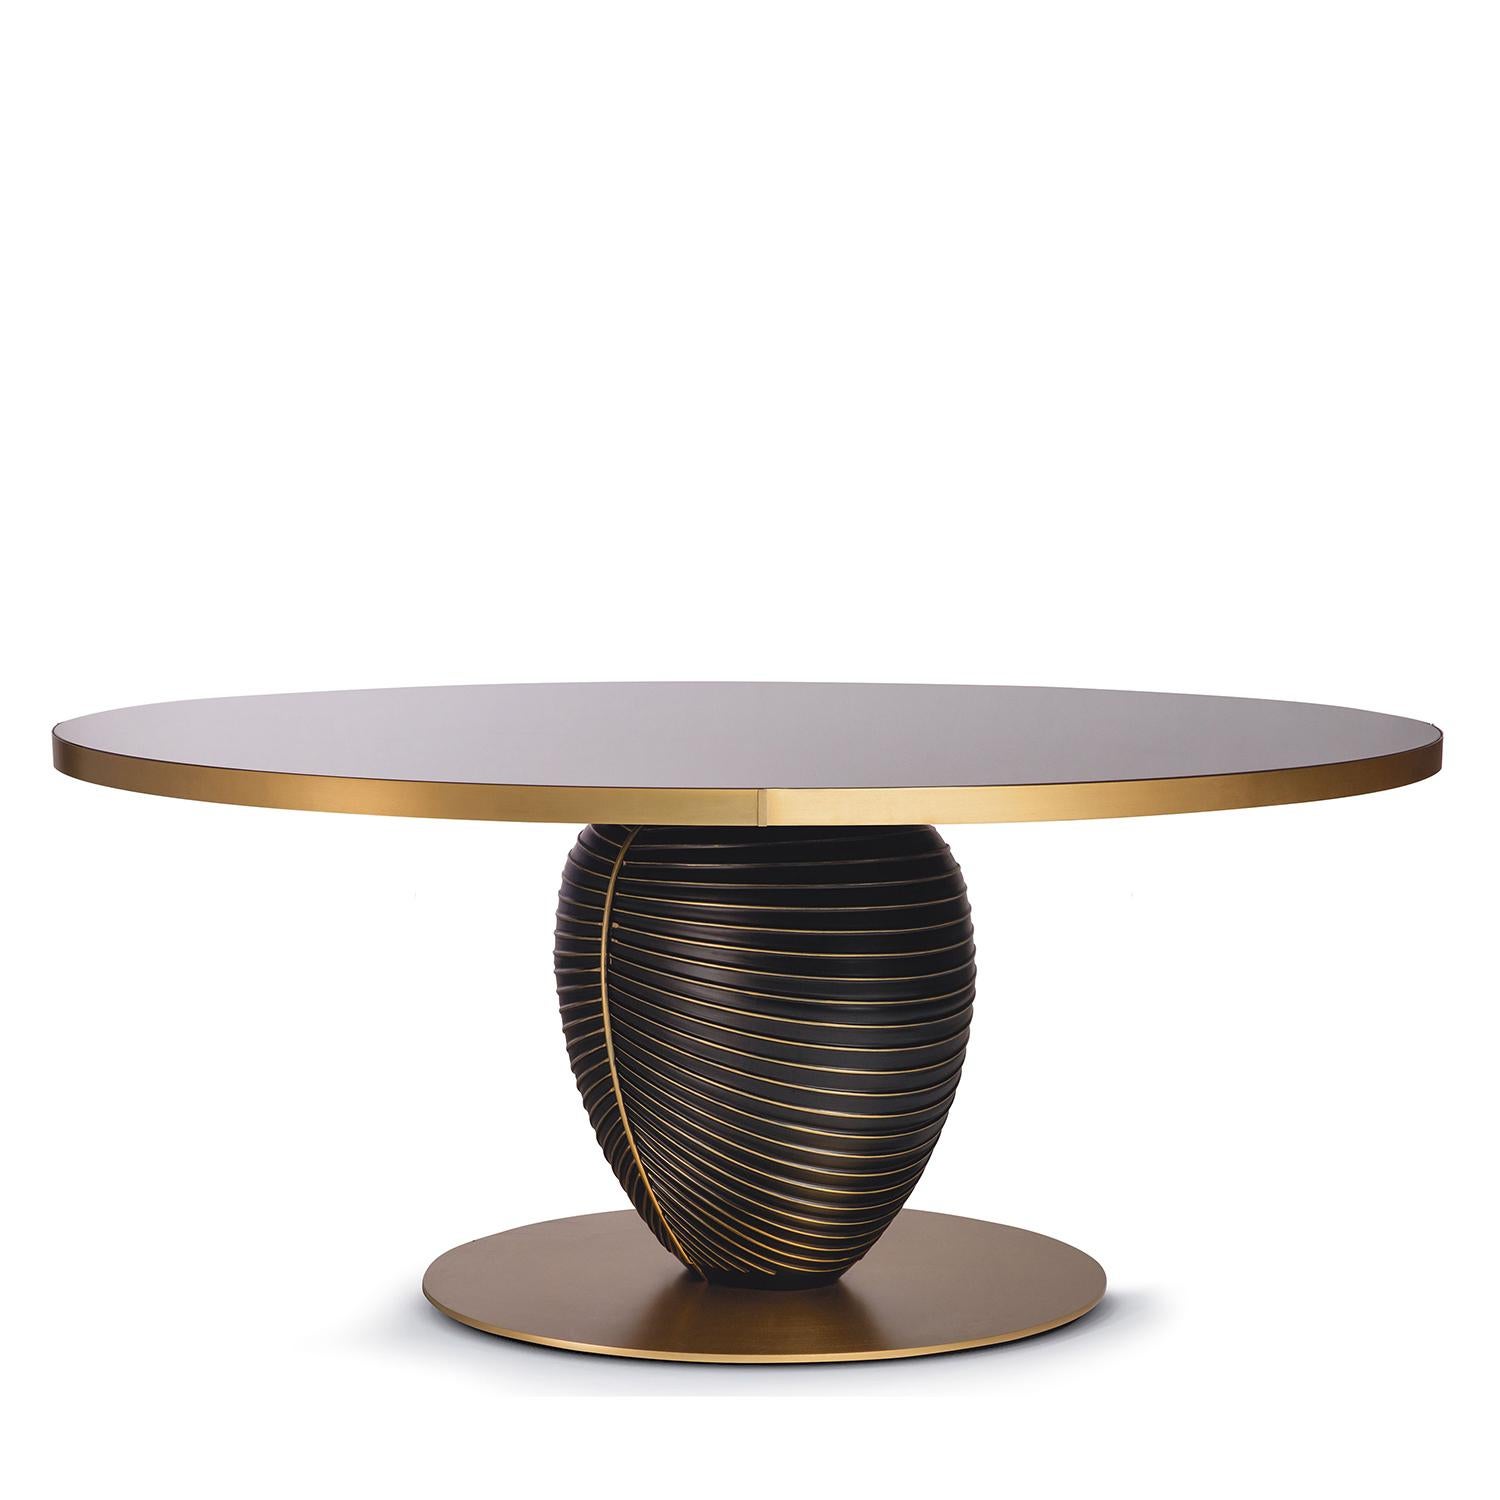 Dining table nature round with resin concrete pedestal
in matt satinated gilted finish and with round metal base in
matt satinated gilted finish. With round glass top back lacquered 
in brown color lacquered finish and with metal trim in matt